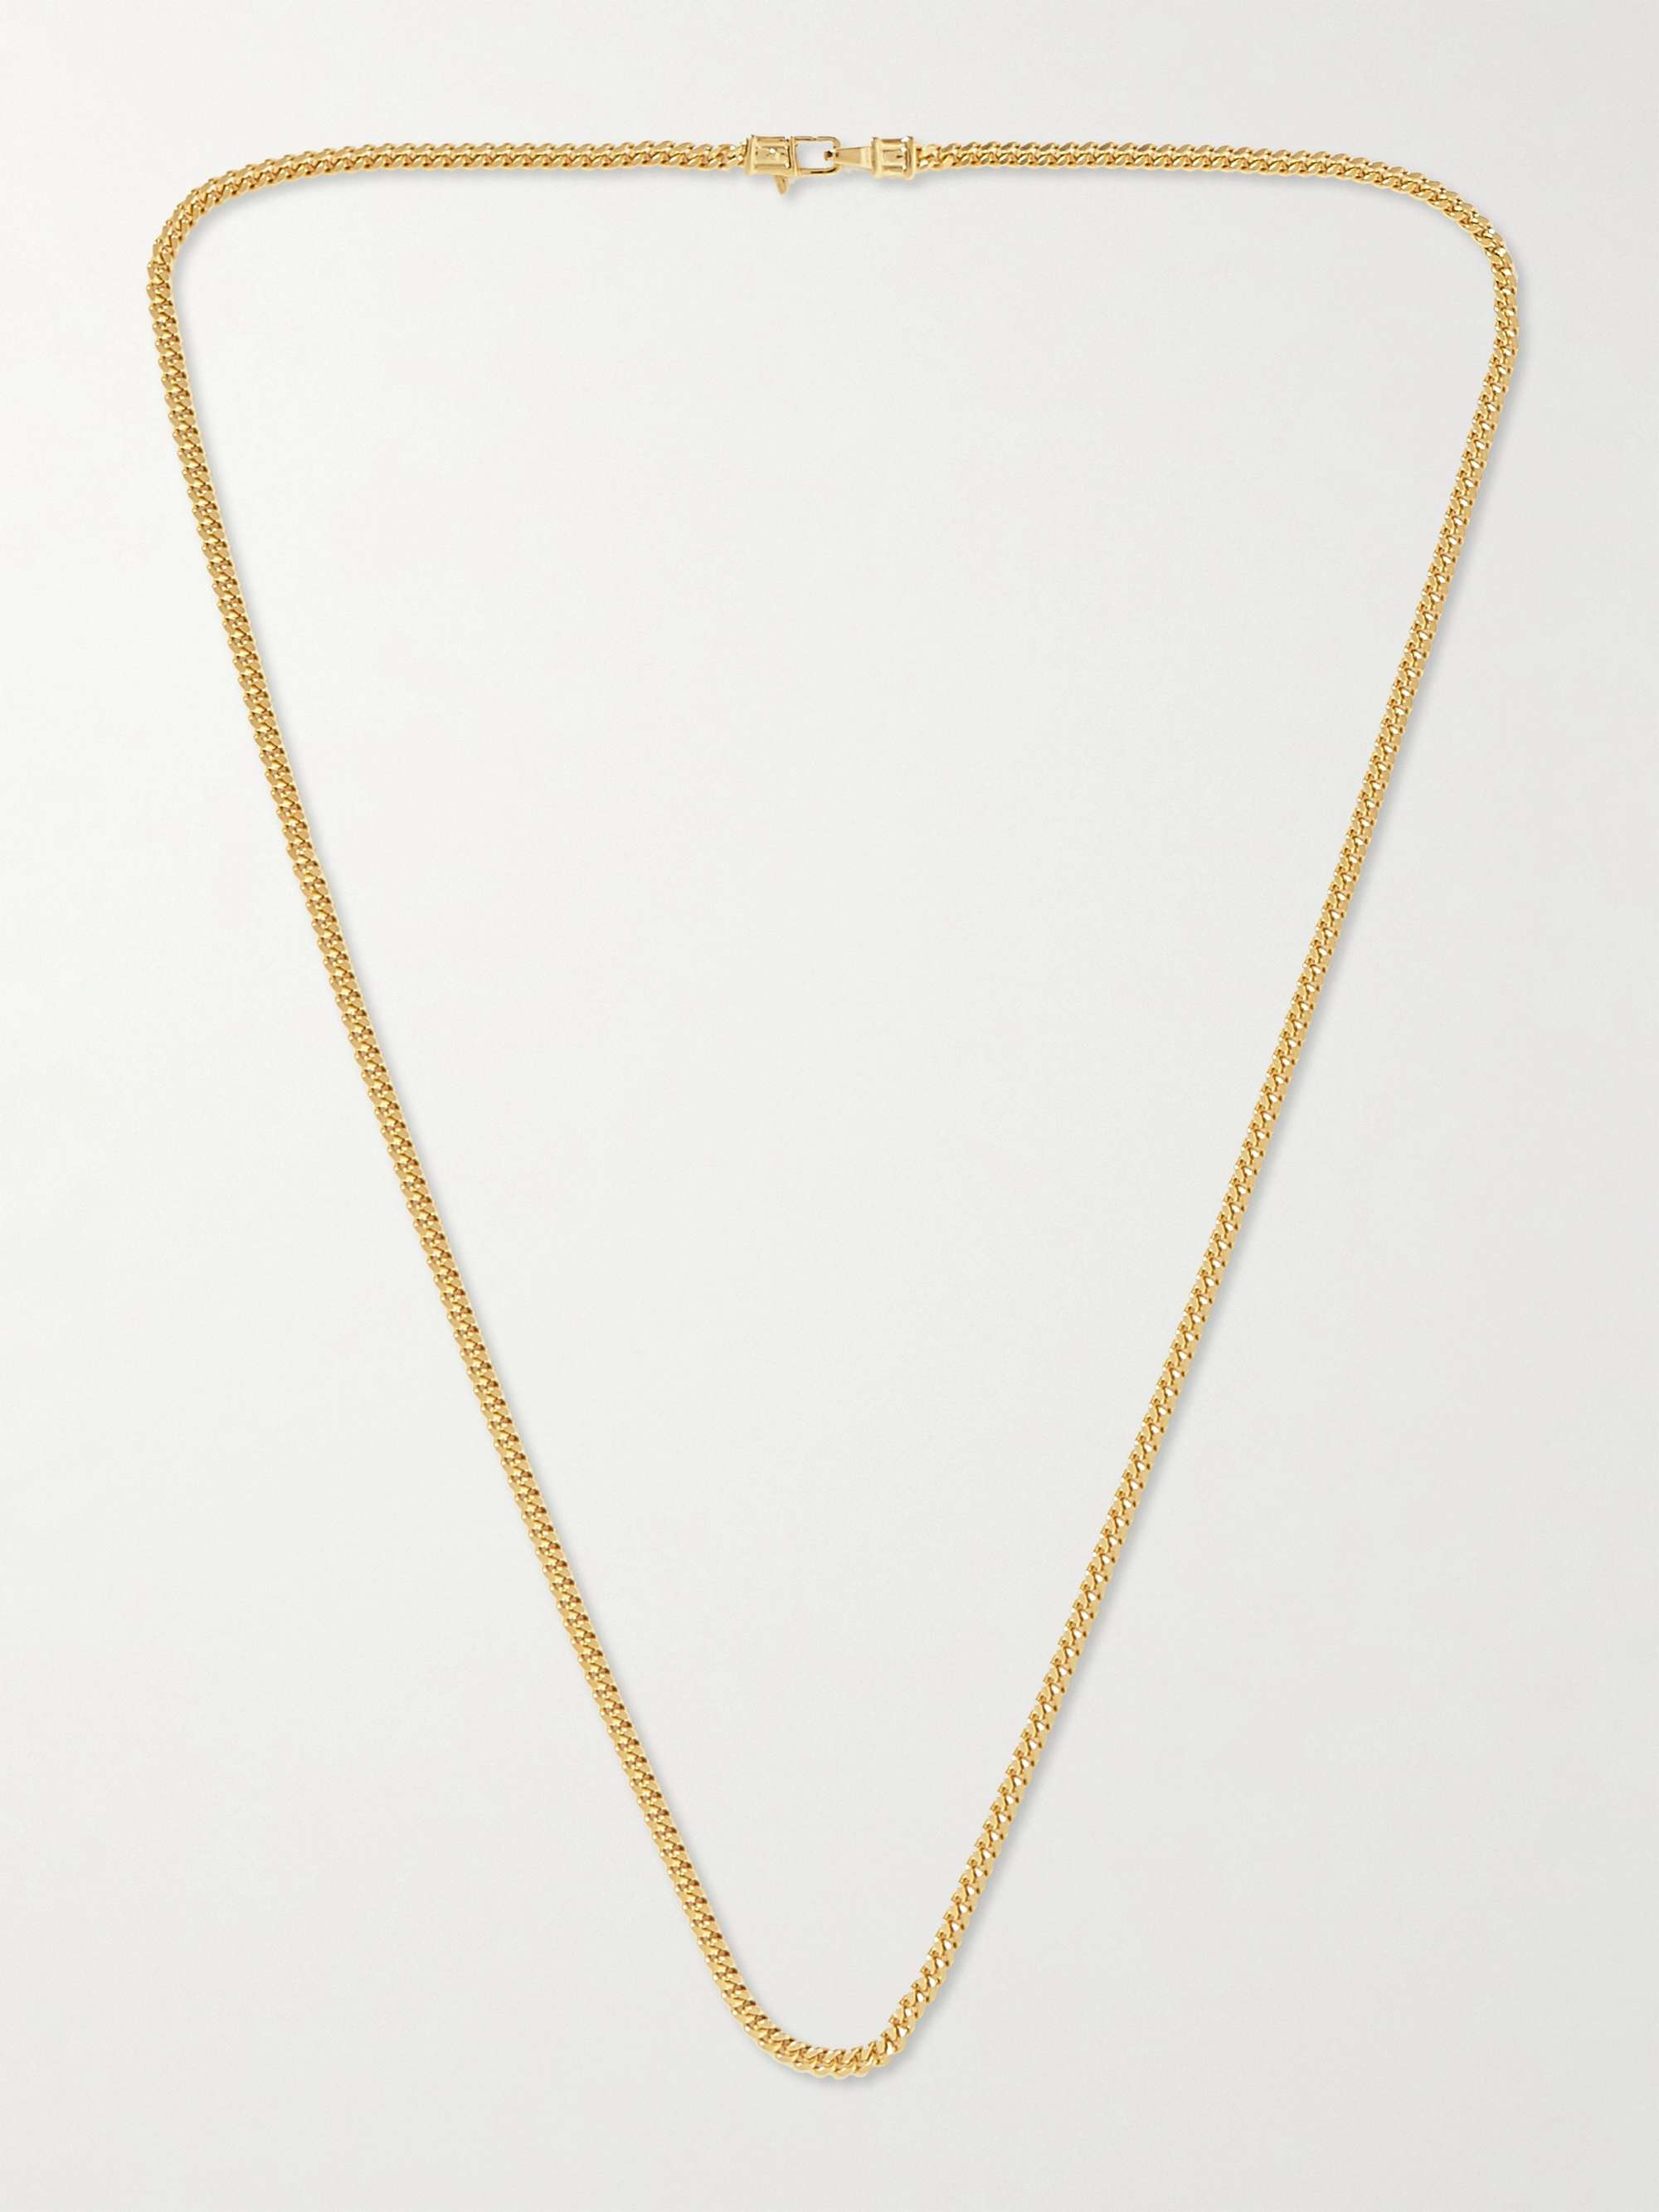 TOM WOOD Gold-Plated Chain Necklace